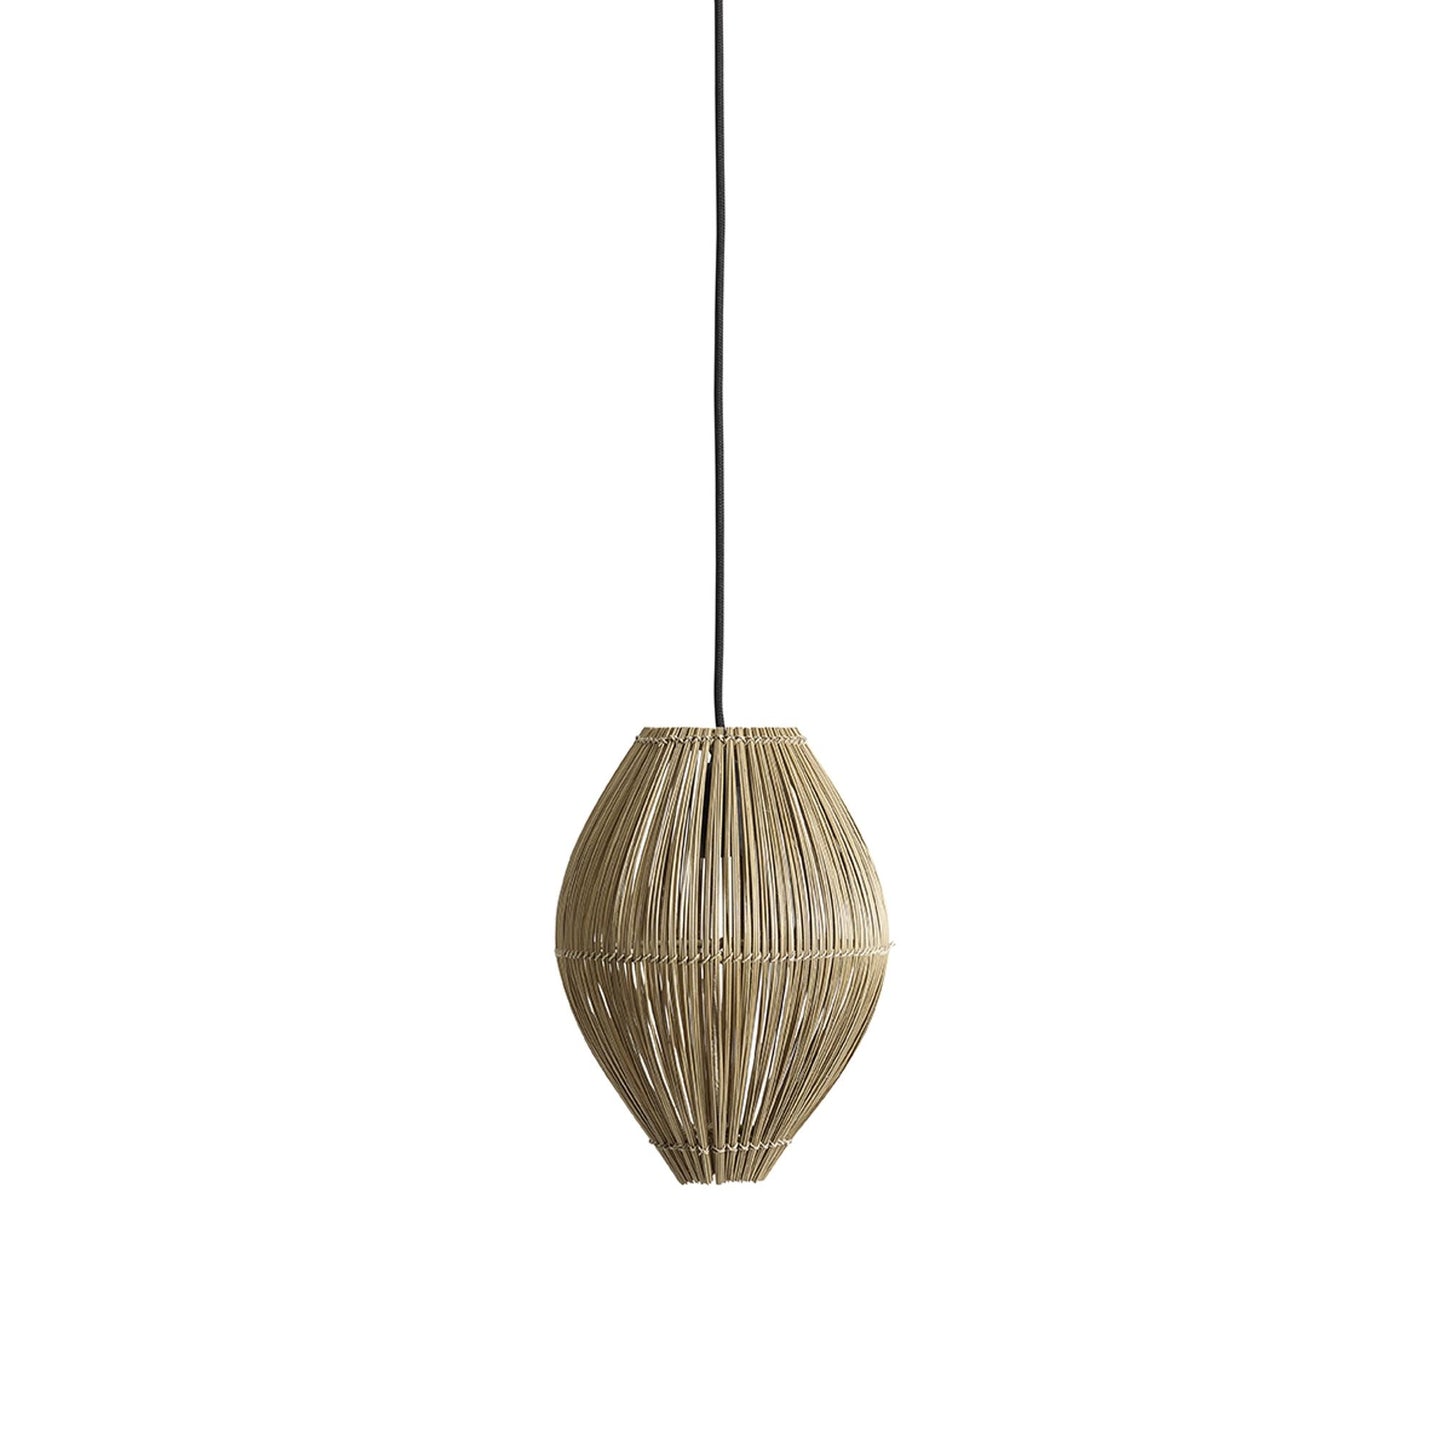 Fishtrap Pendant Lamp Small by Muubs #Natural